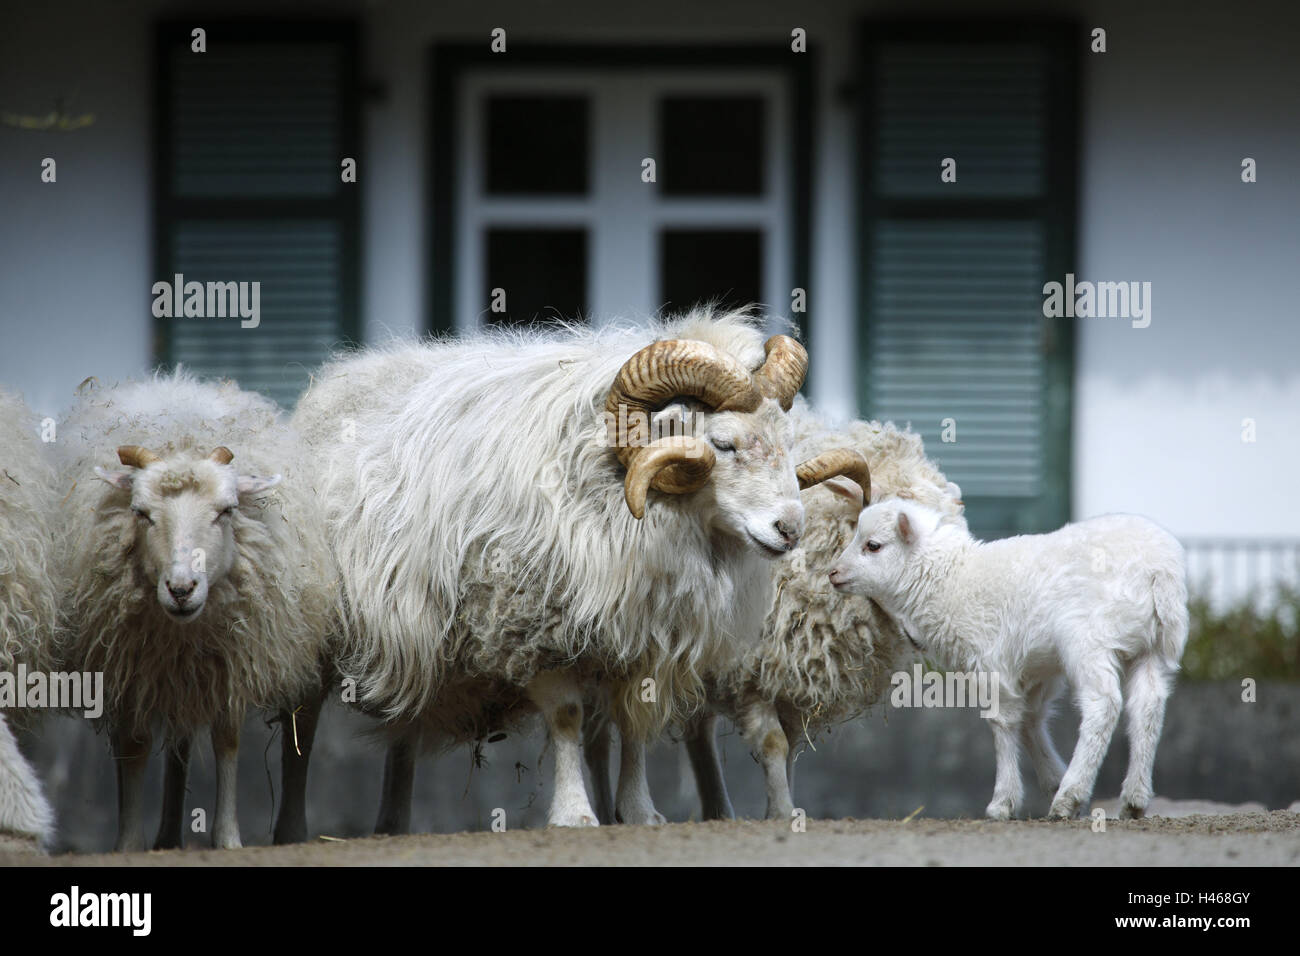 Skudden, sheep, Ovis aries, Germany, moor sheep, group, ram, goat, horns, nanny-goat, lamb, young animal, robustly, cloven-hoofed animal, domestic sheep, benefit animal races, Stock Photo